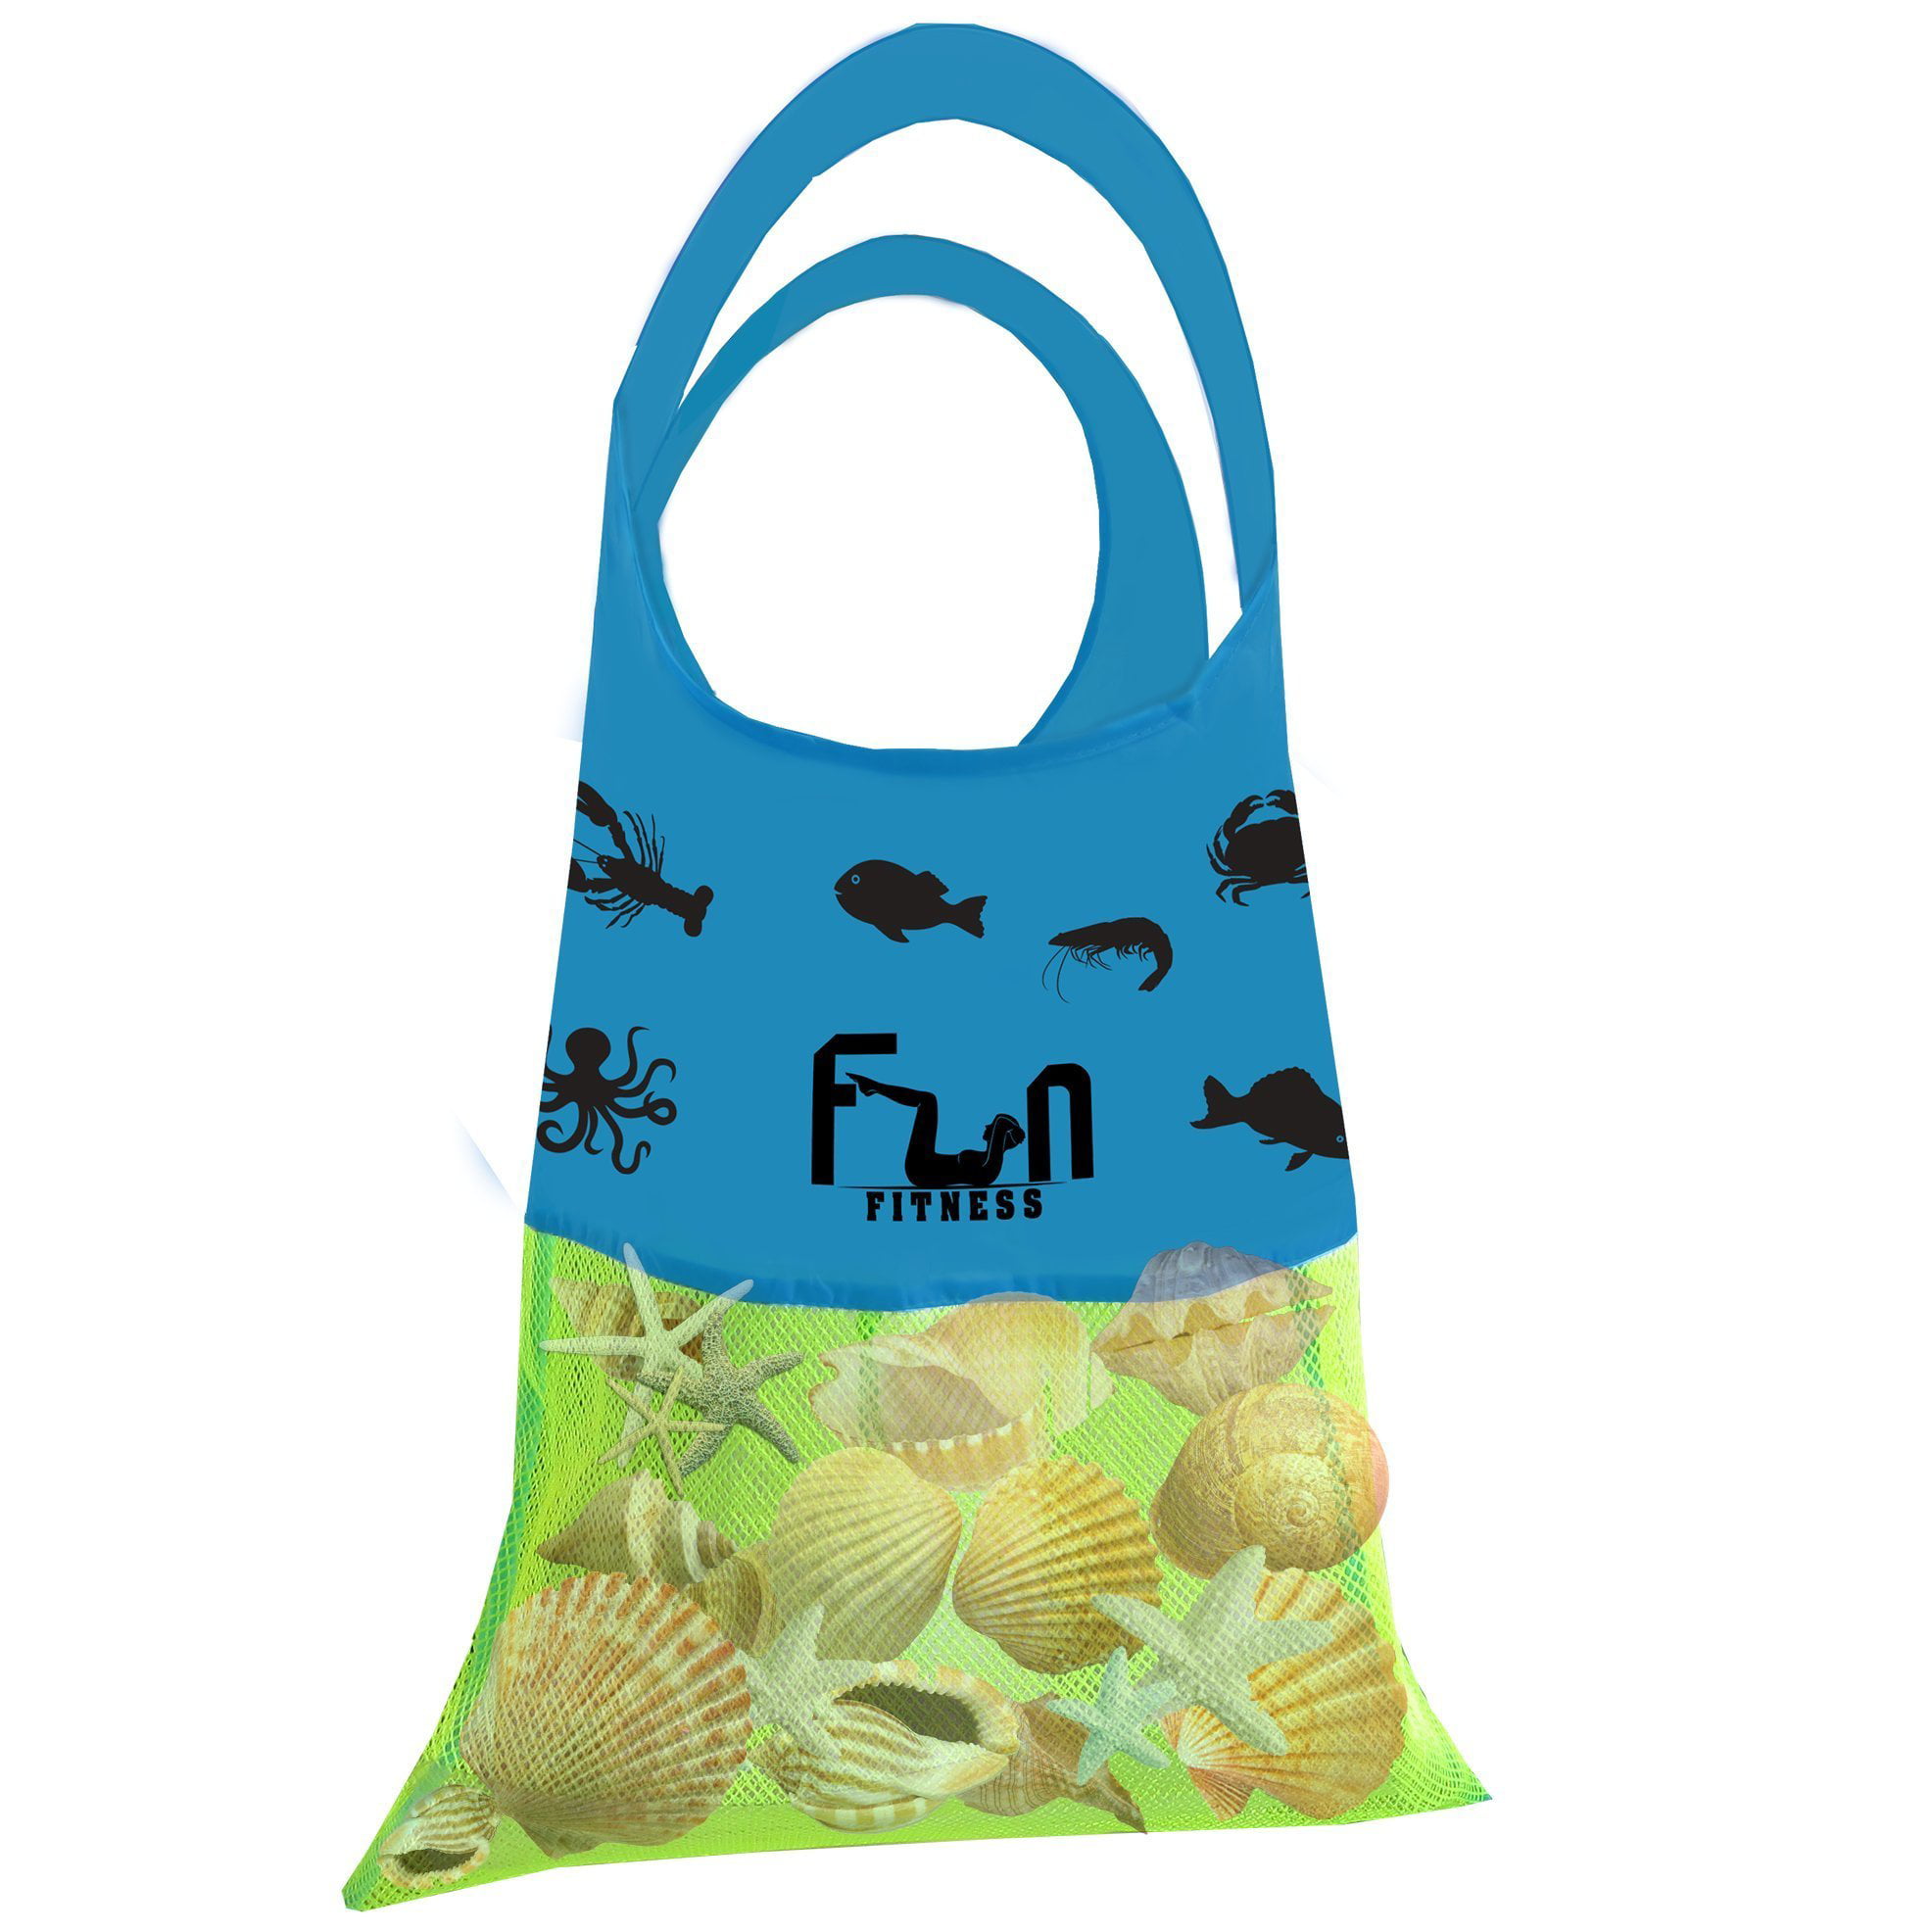 MESH BAG Seashells Beach Towel Go Well with Sand Dipper & Sea Shell Sifter Tool Keep Sand and Water Away Premium Net Tote Perfect for Kid Pool Toy Easy to Carry in Cute Fish Pocket Swimsuit 